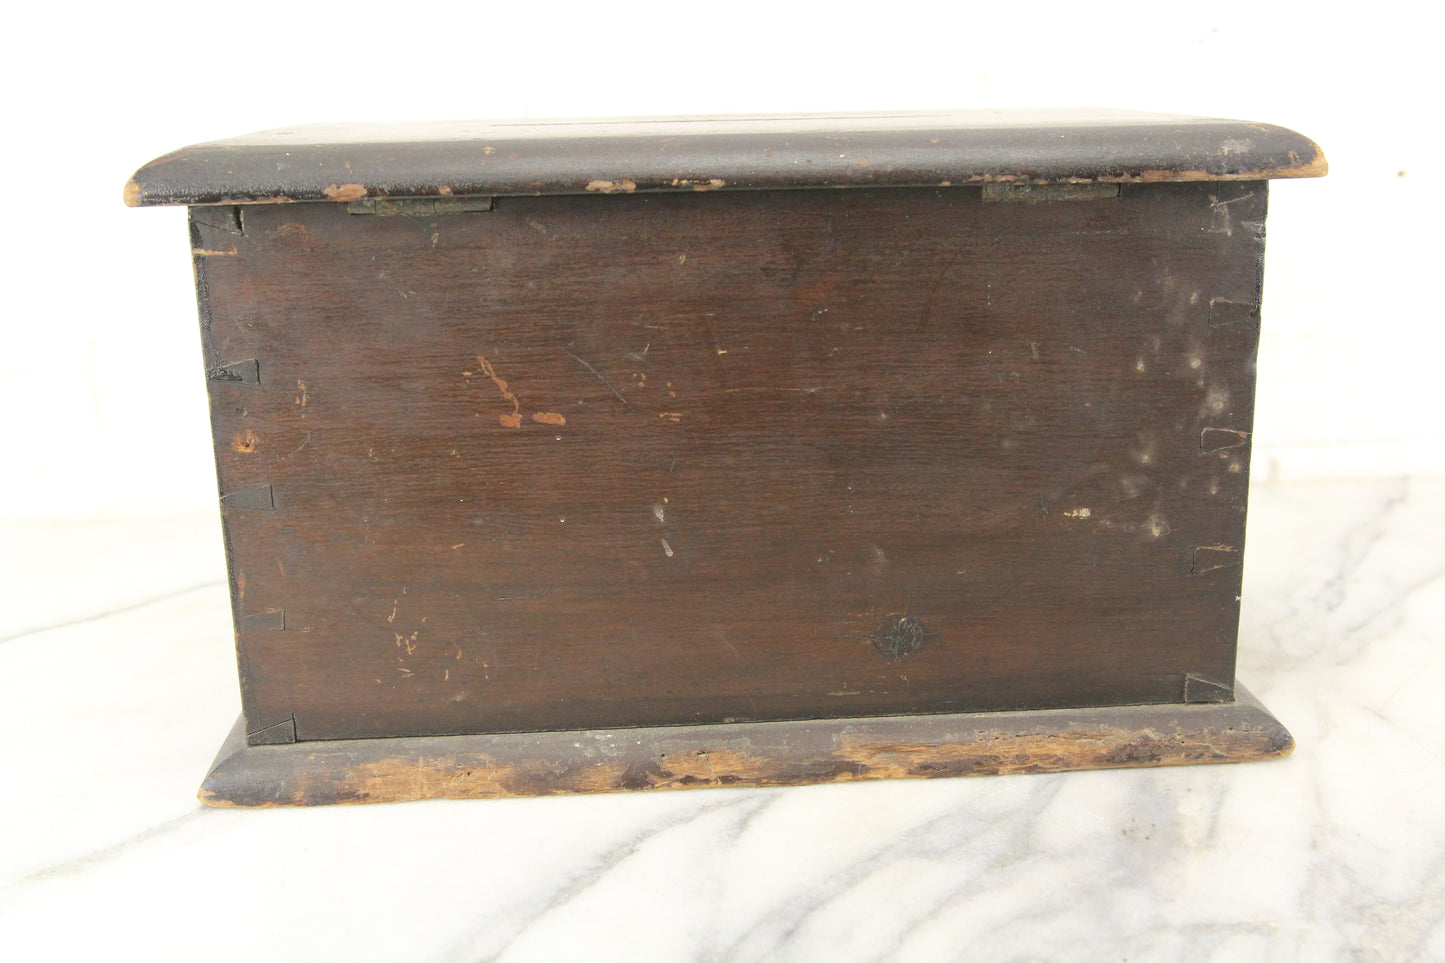 Antique Hand Painted Dovetailed Wood Church Ballot Box "Communications for Minister"